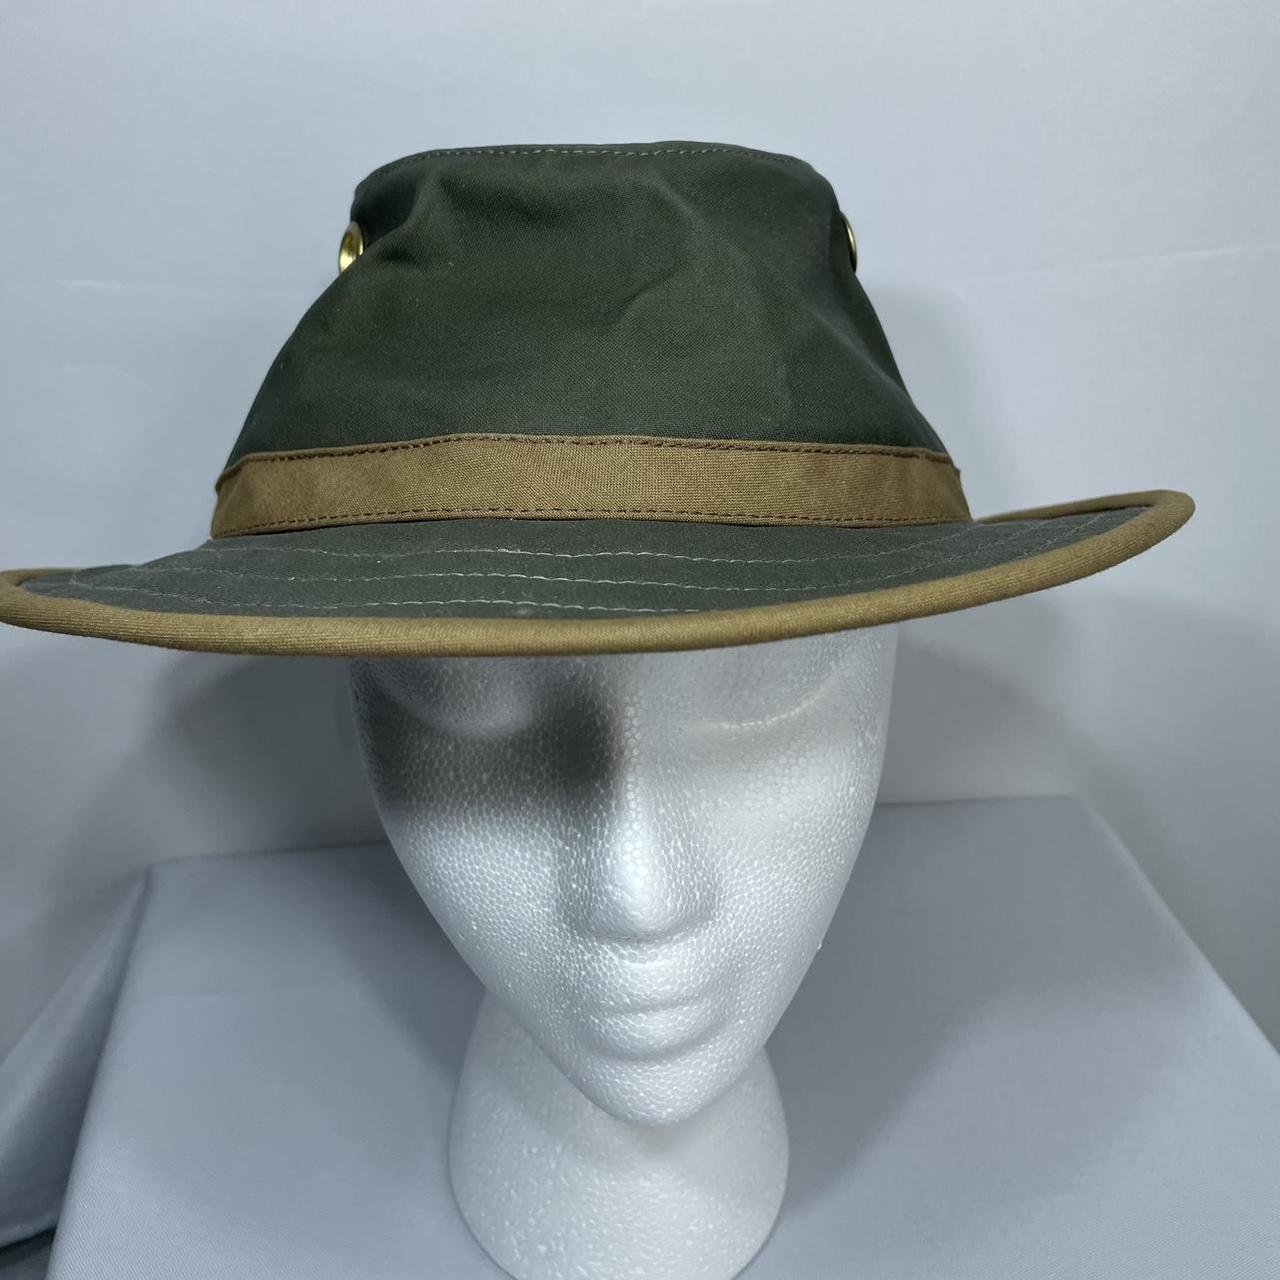 New Tilley Outback Hat High Quality Water Repellant... - Depop